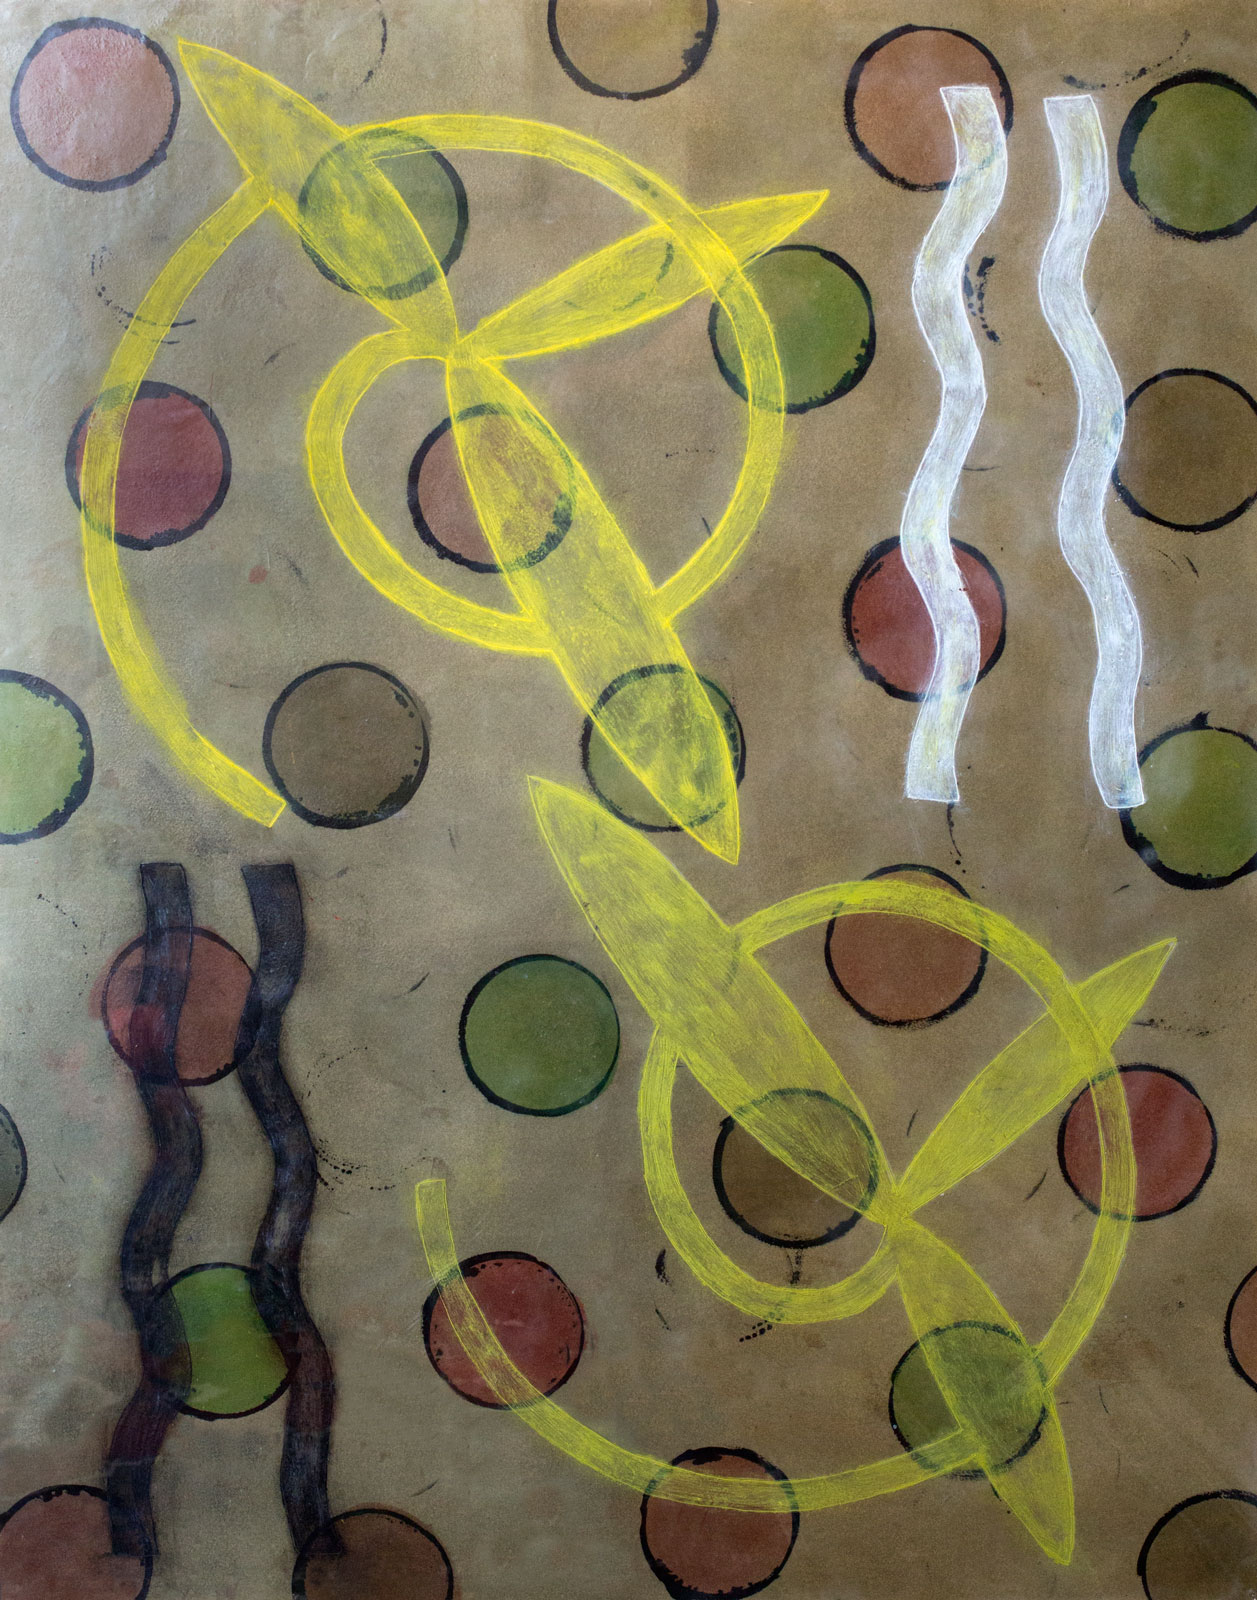 "Notes From Kells", encaustic painting on panel, 45" x 37" © Tom Gormally